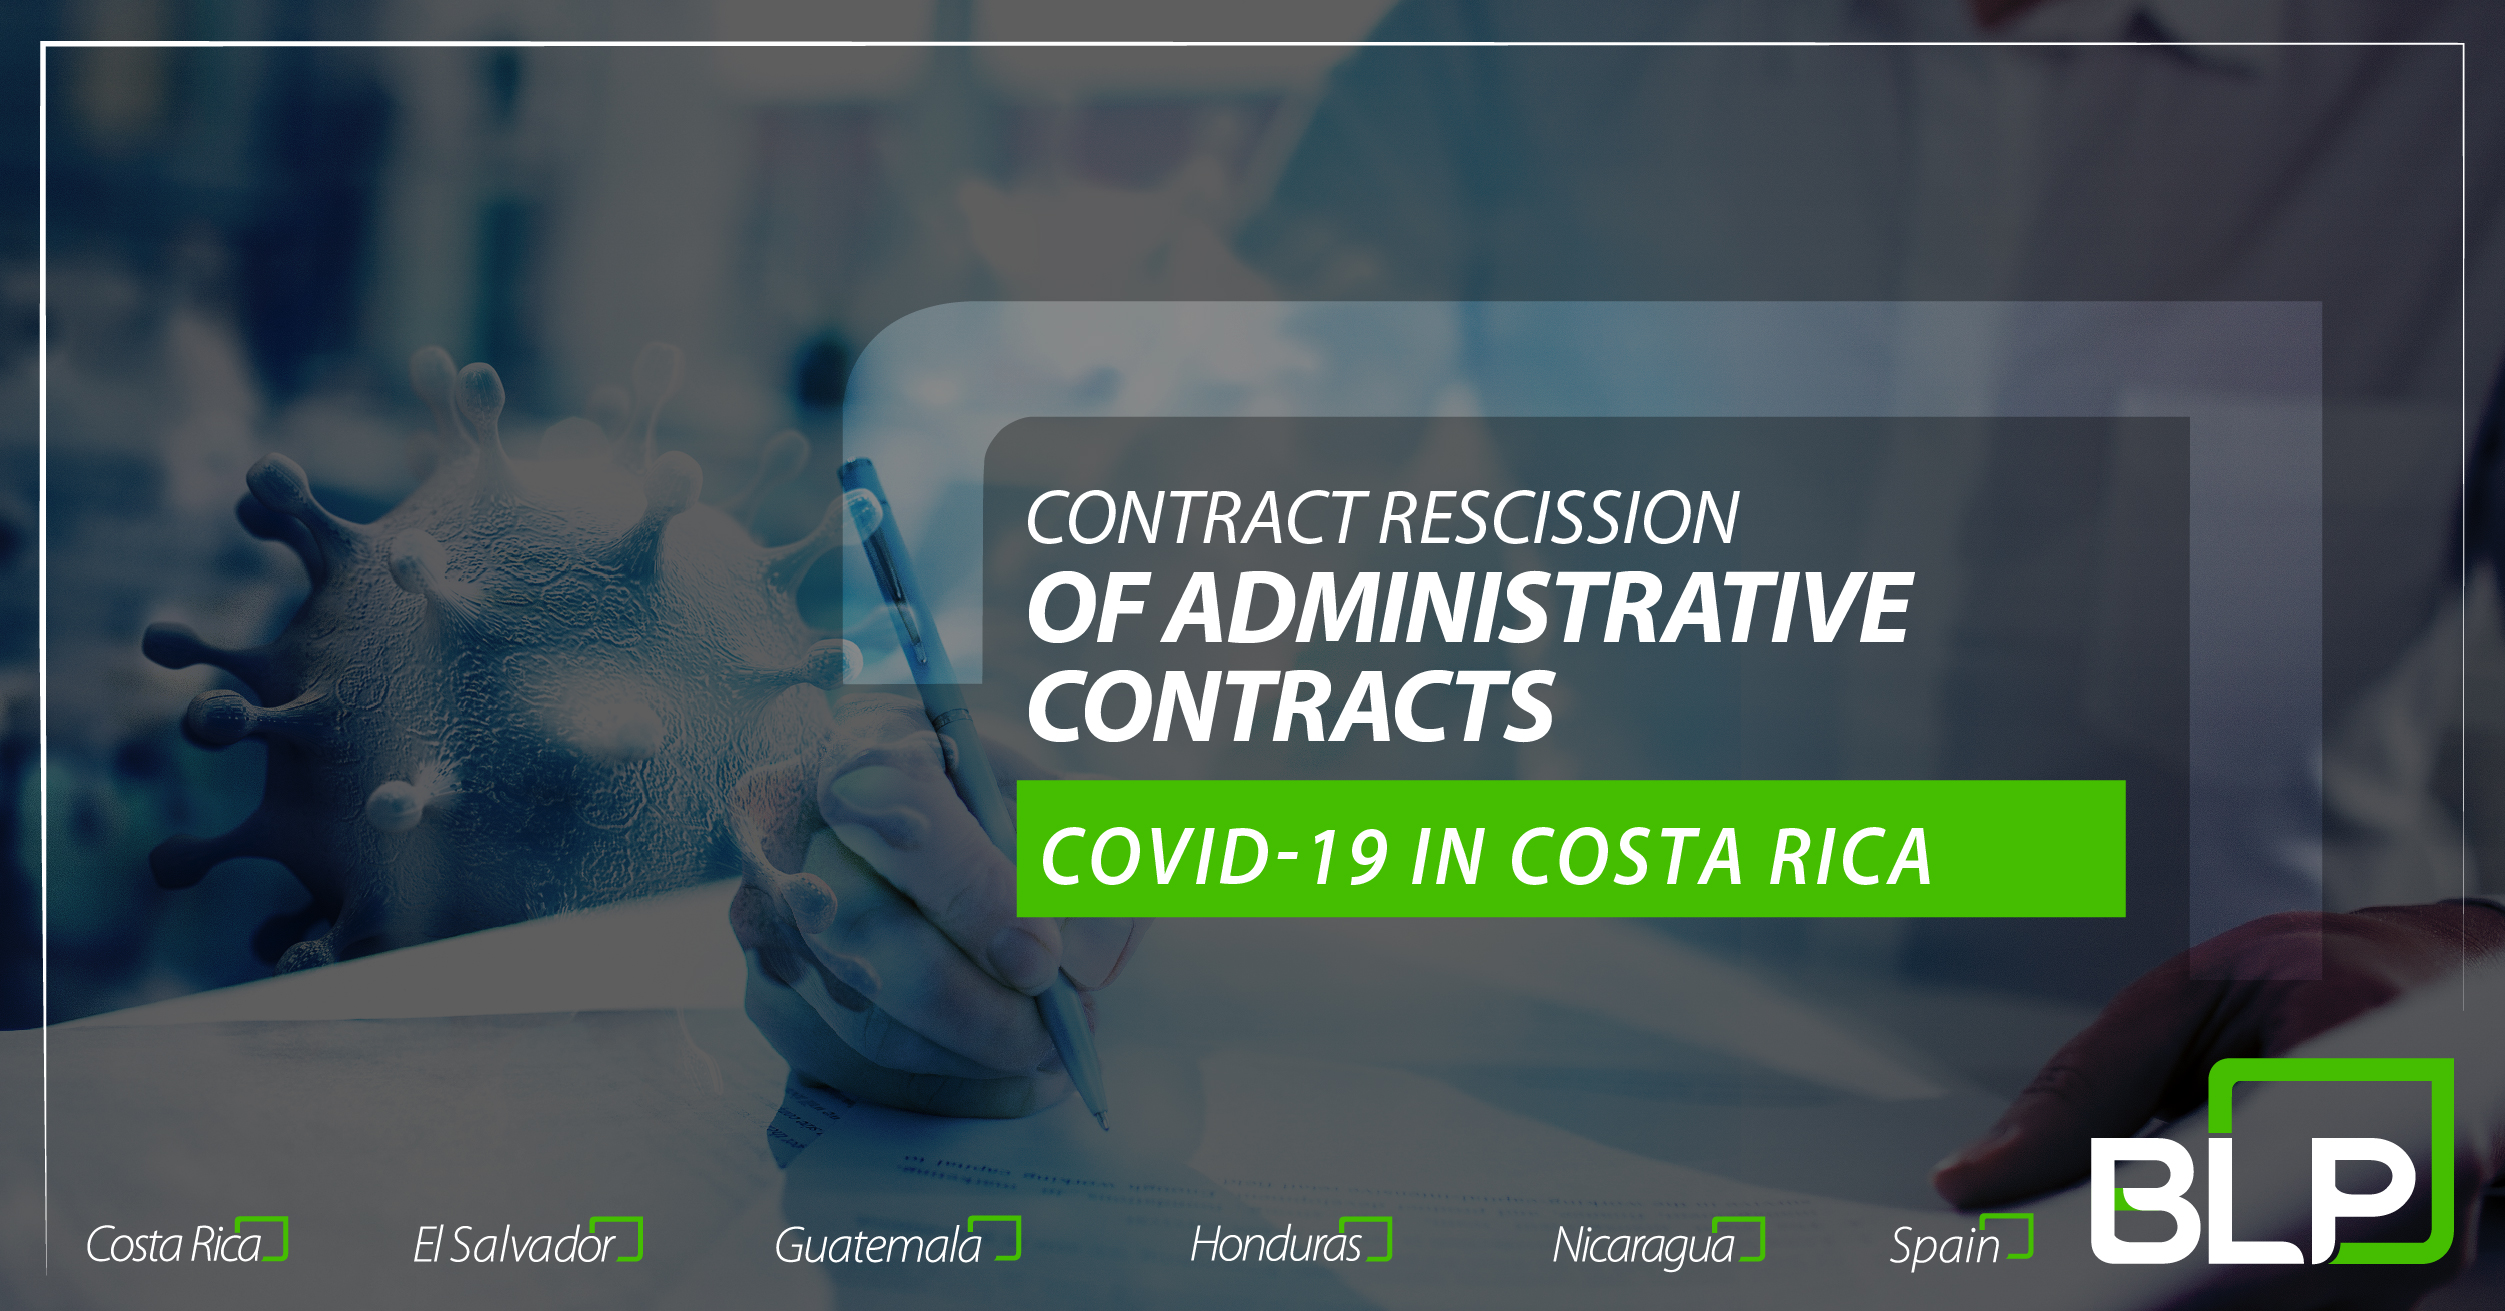 Contract rescission of administrative contracts in the COVID-19 Pandemic.